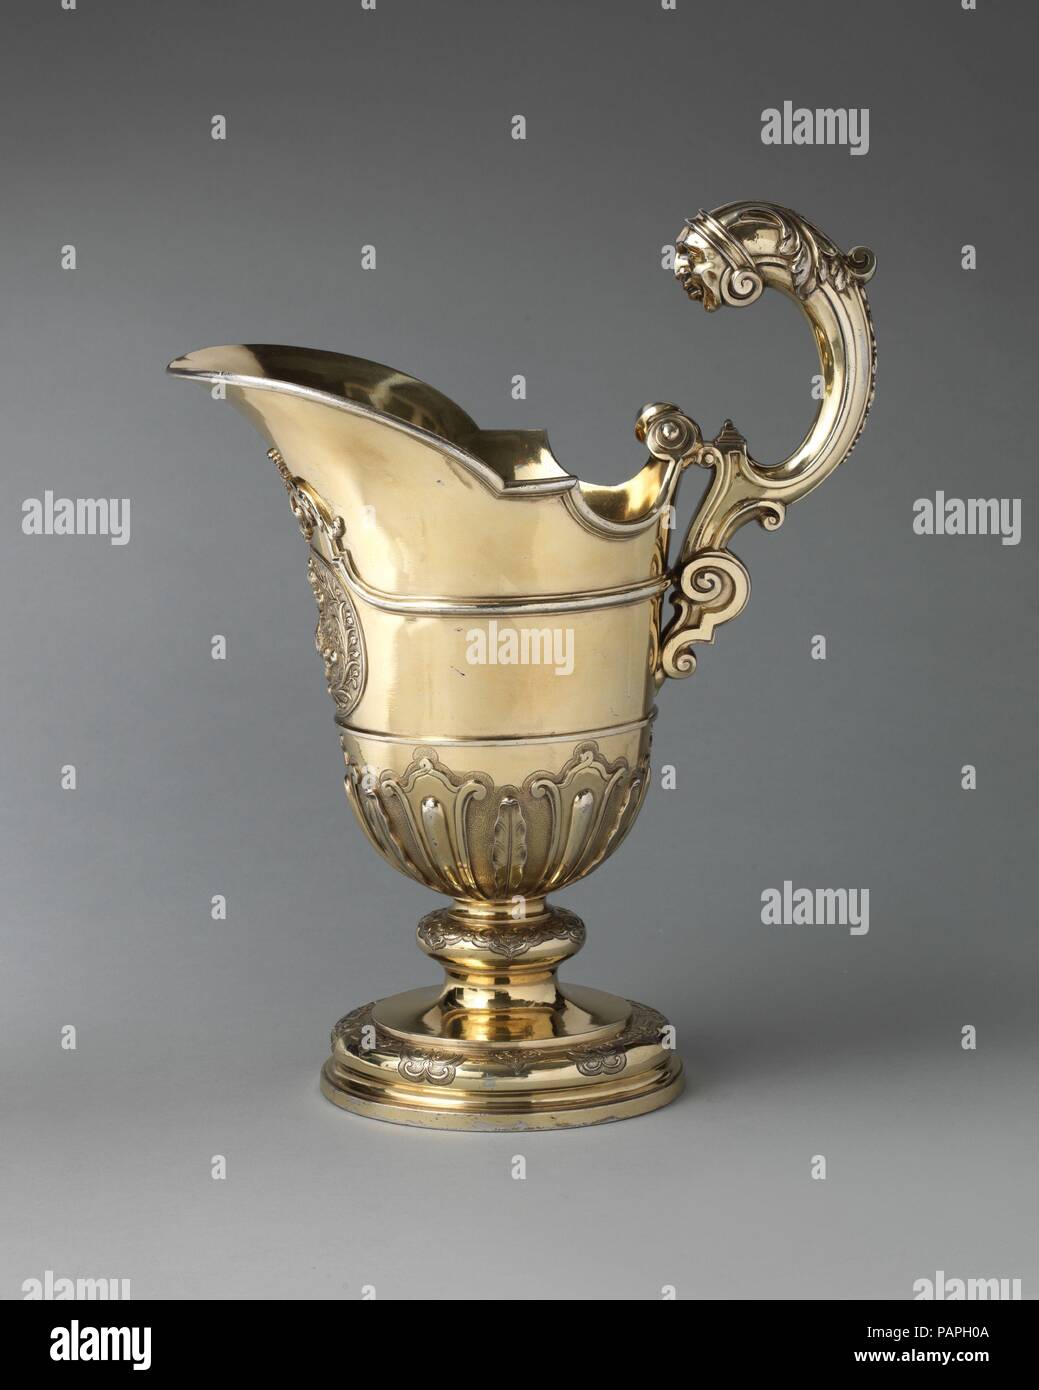 Ewer. Culture: British, London. Dimensions: Overall (confirmed): 14 1/4 x 7 3/8 x 11 1/2 in., 103 oz. 15 dwg. (36.2 x 18.7 x 29.2 cm, 3.2265kg). Maker: Samuel Margas Jr. (British, active 1714-33). Date: ca. 1721.  This massive ewer and dish was made in London for shipment to St. Petersburg.  It was part of a large order placed by Empress Catherine I, who ambitiously sought to bring fashionable western-style furnishings to her court. The ewer and dish would have been displayed on a tiered buffet for banquets and court dinners.    London's silversmiths in the eighteenth century attracted interna Stock Photo